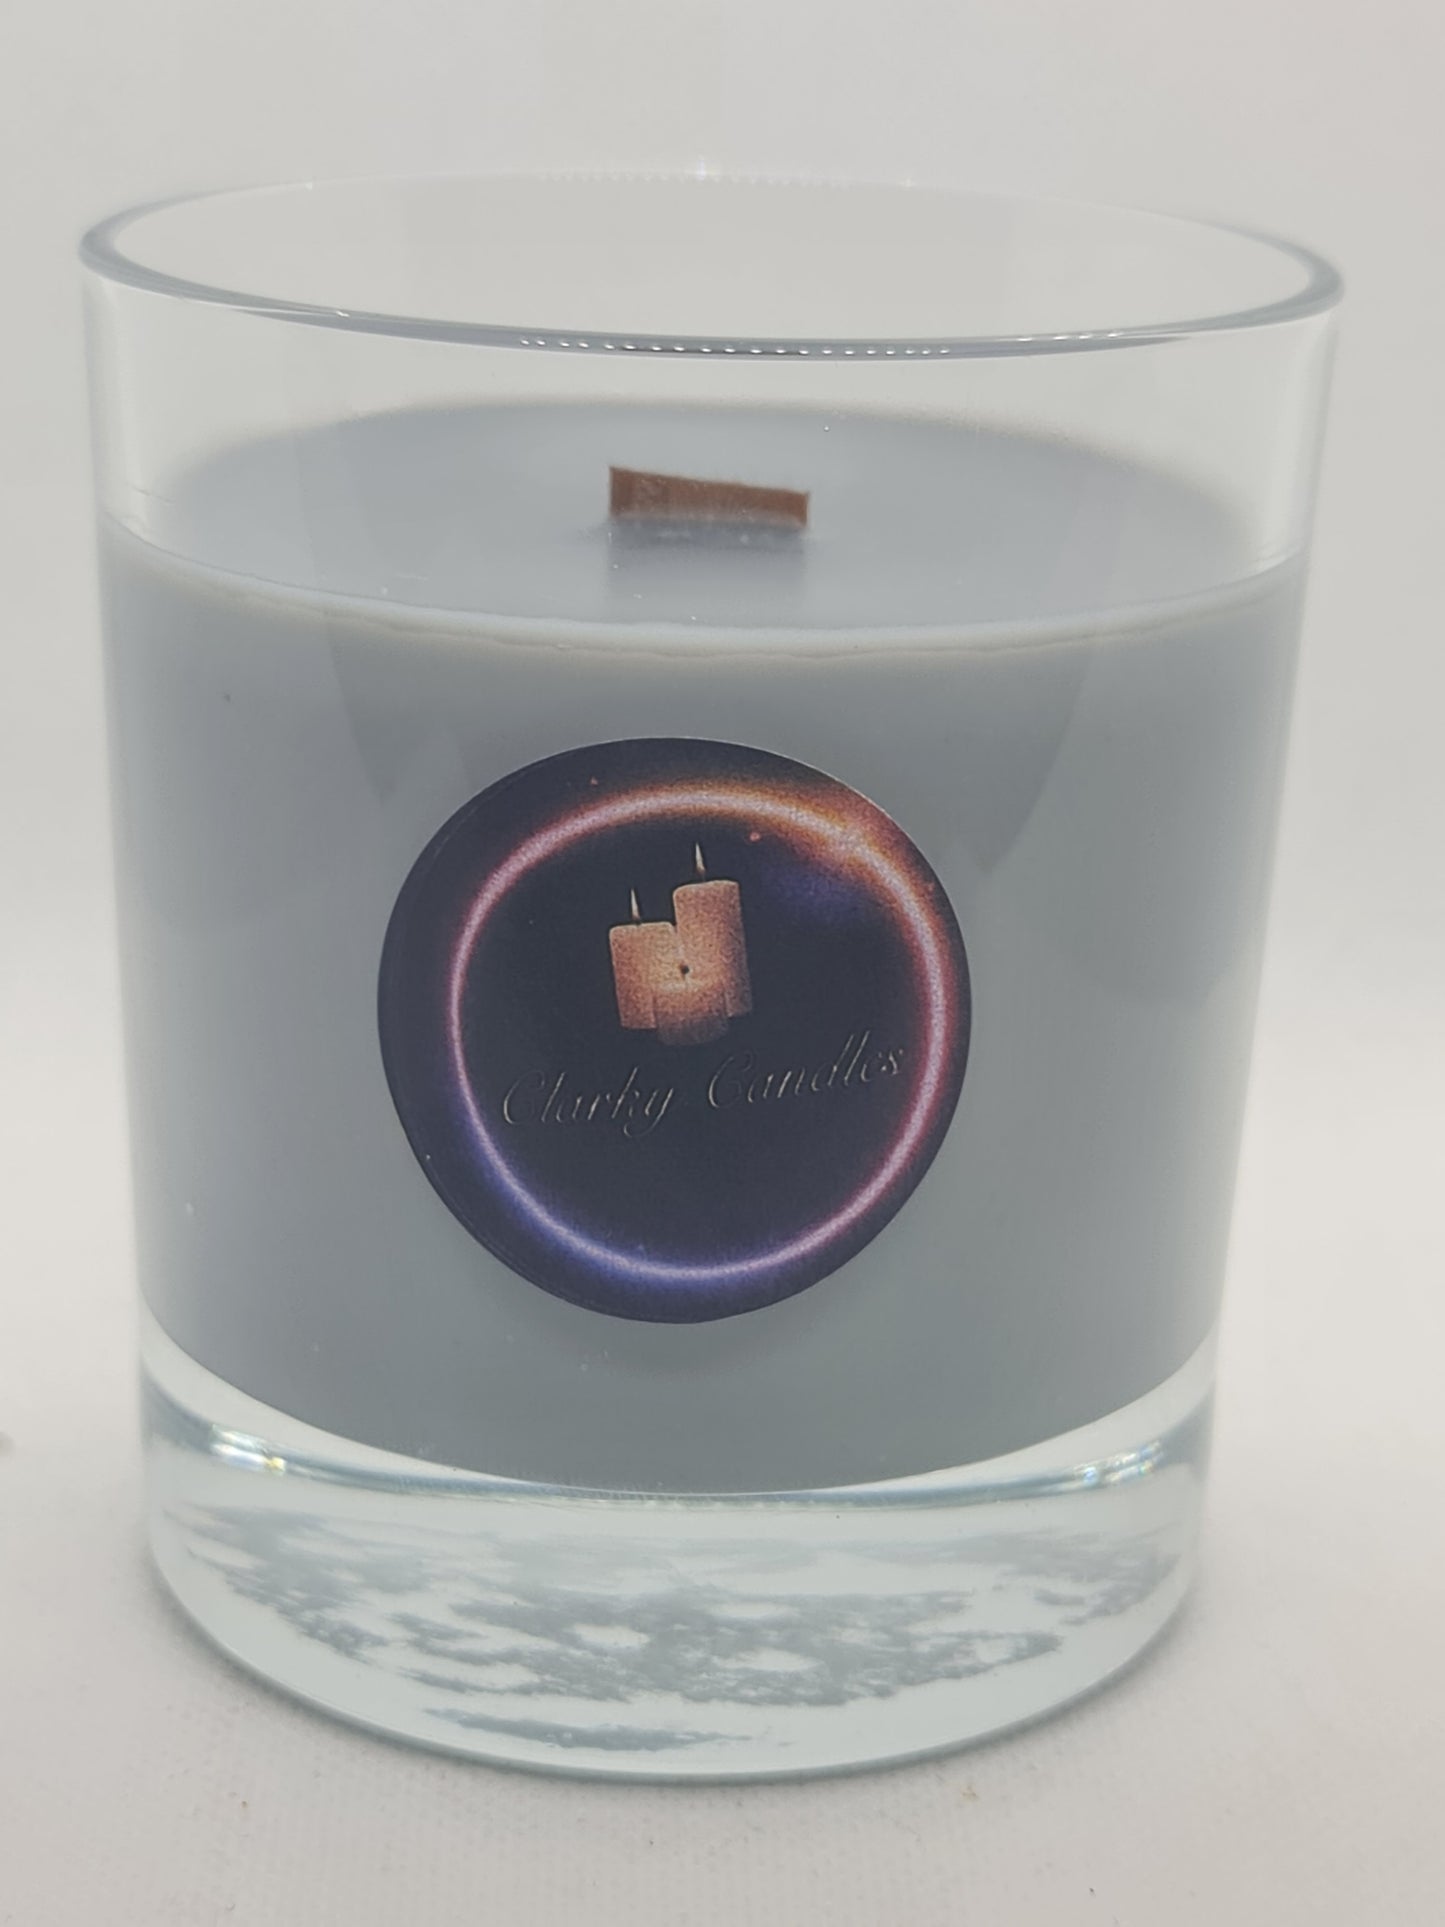 Black Cherry - Wood Wick Scented Candle